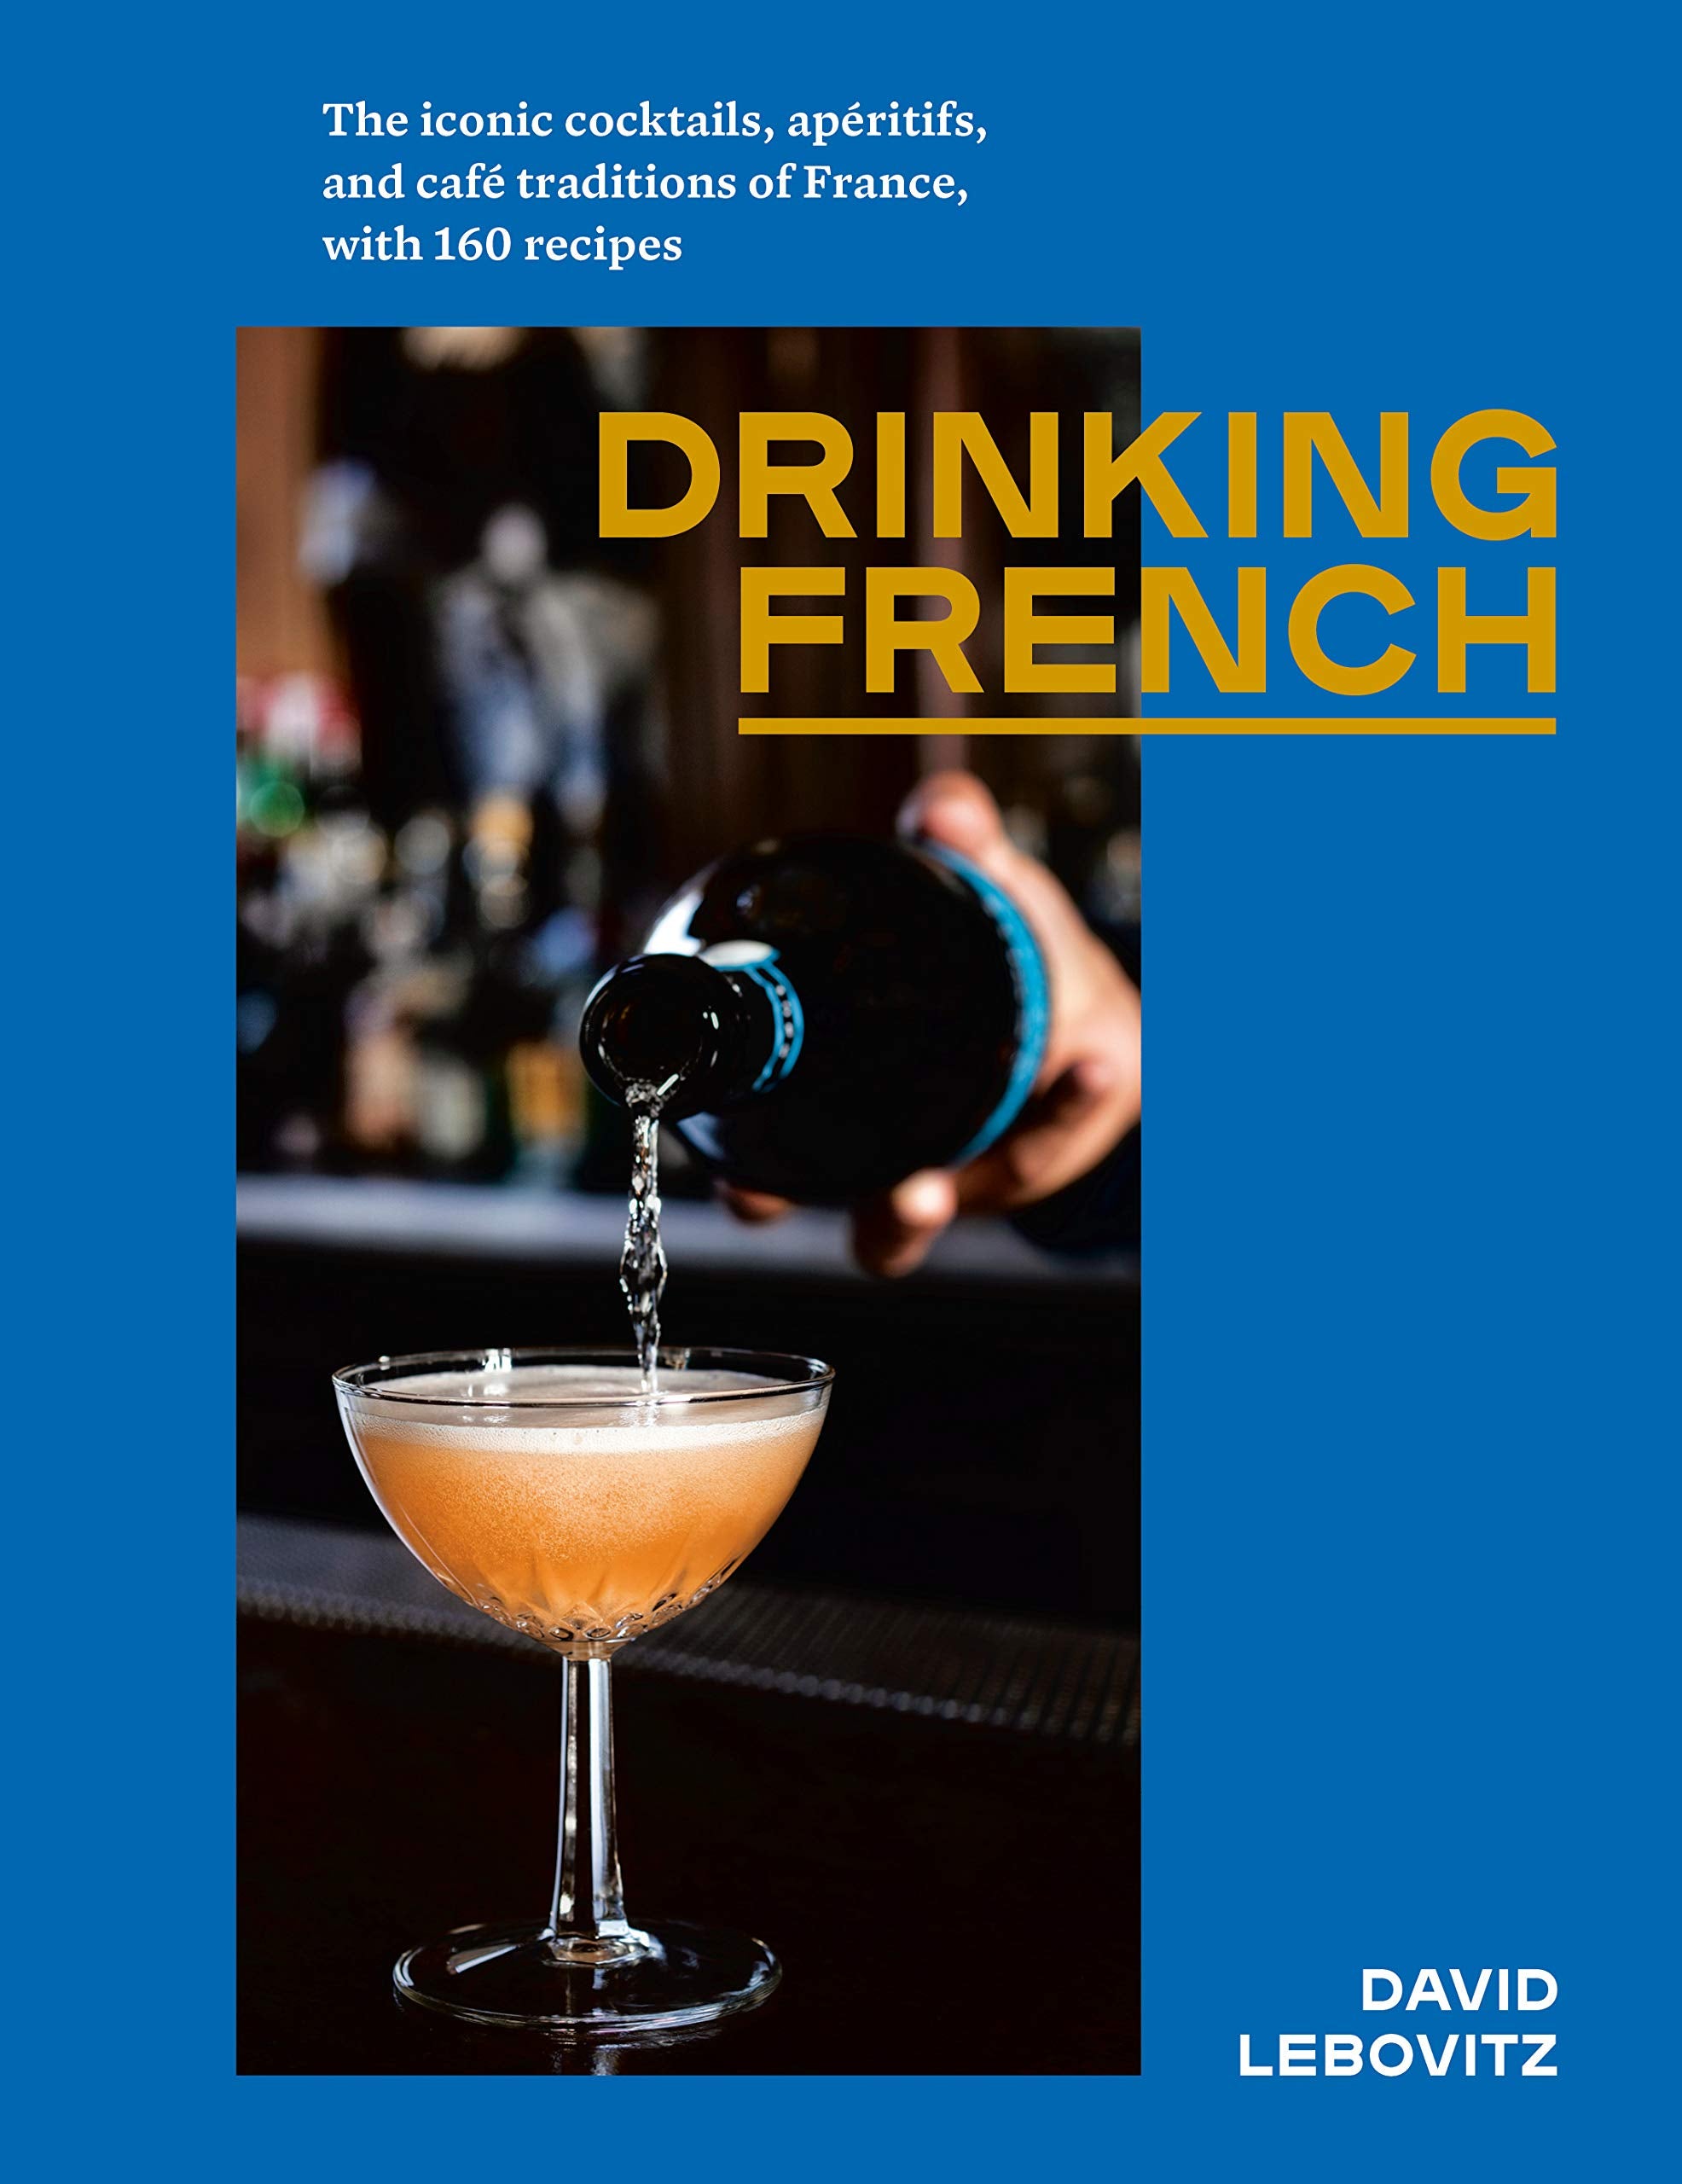 Drinking French: The Iconic Cocktails, Apéritifs, and Café Traditions of France, with 160 Recipes (David Lebovitz)